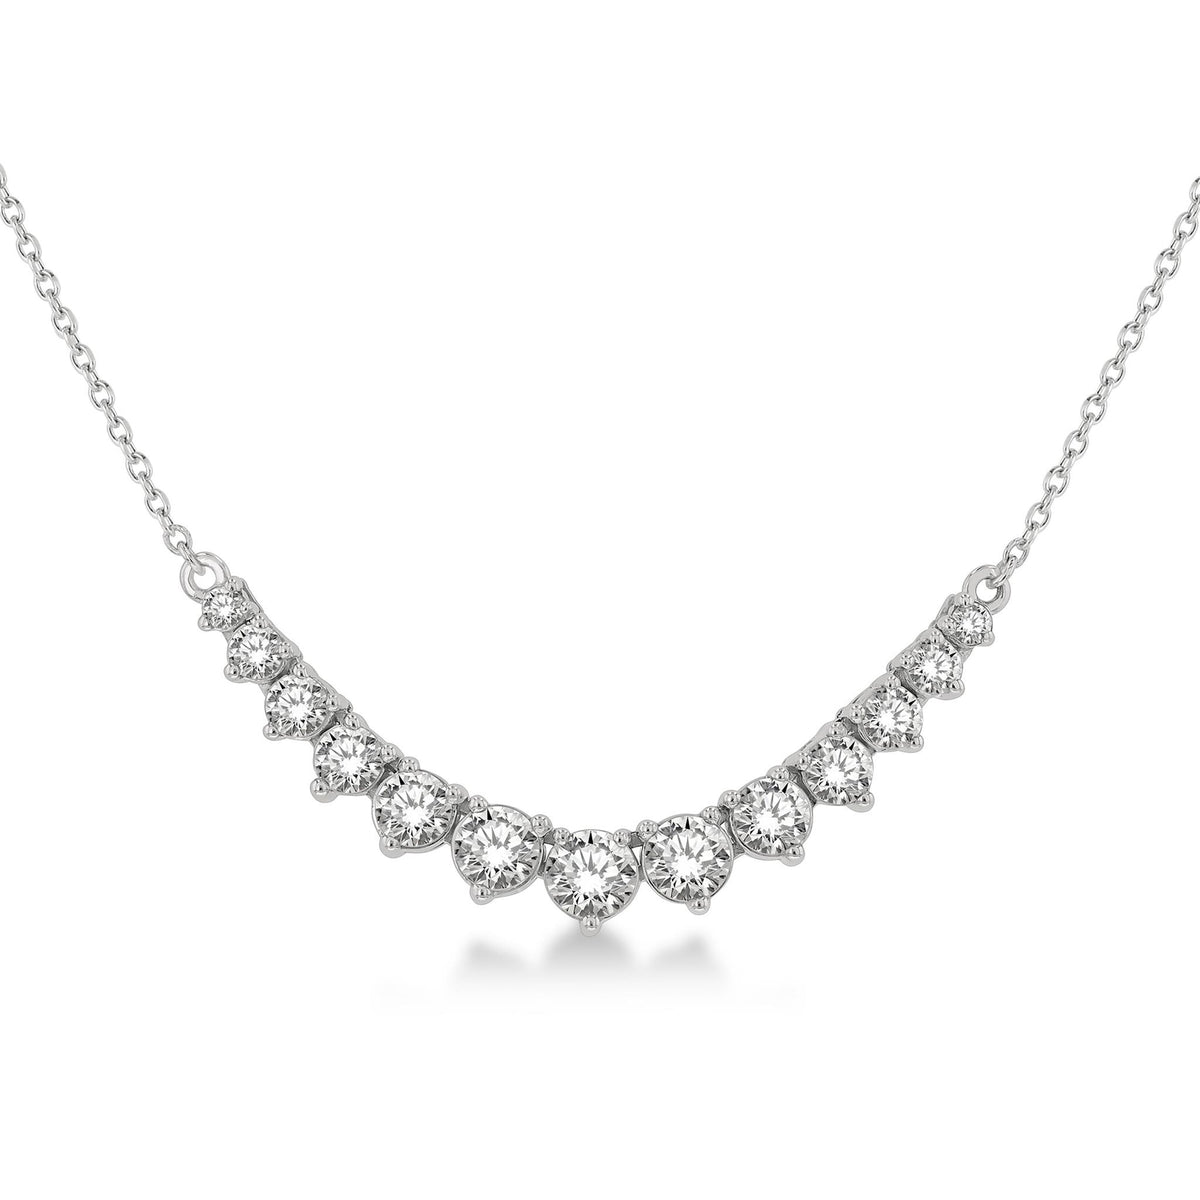 14K White Gold Graduated Diamond Milestone Necklace with 13 Diamonds Totaling .50Cttw